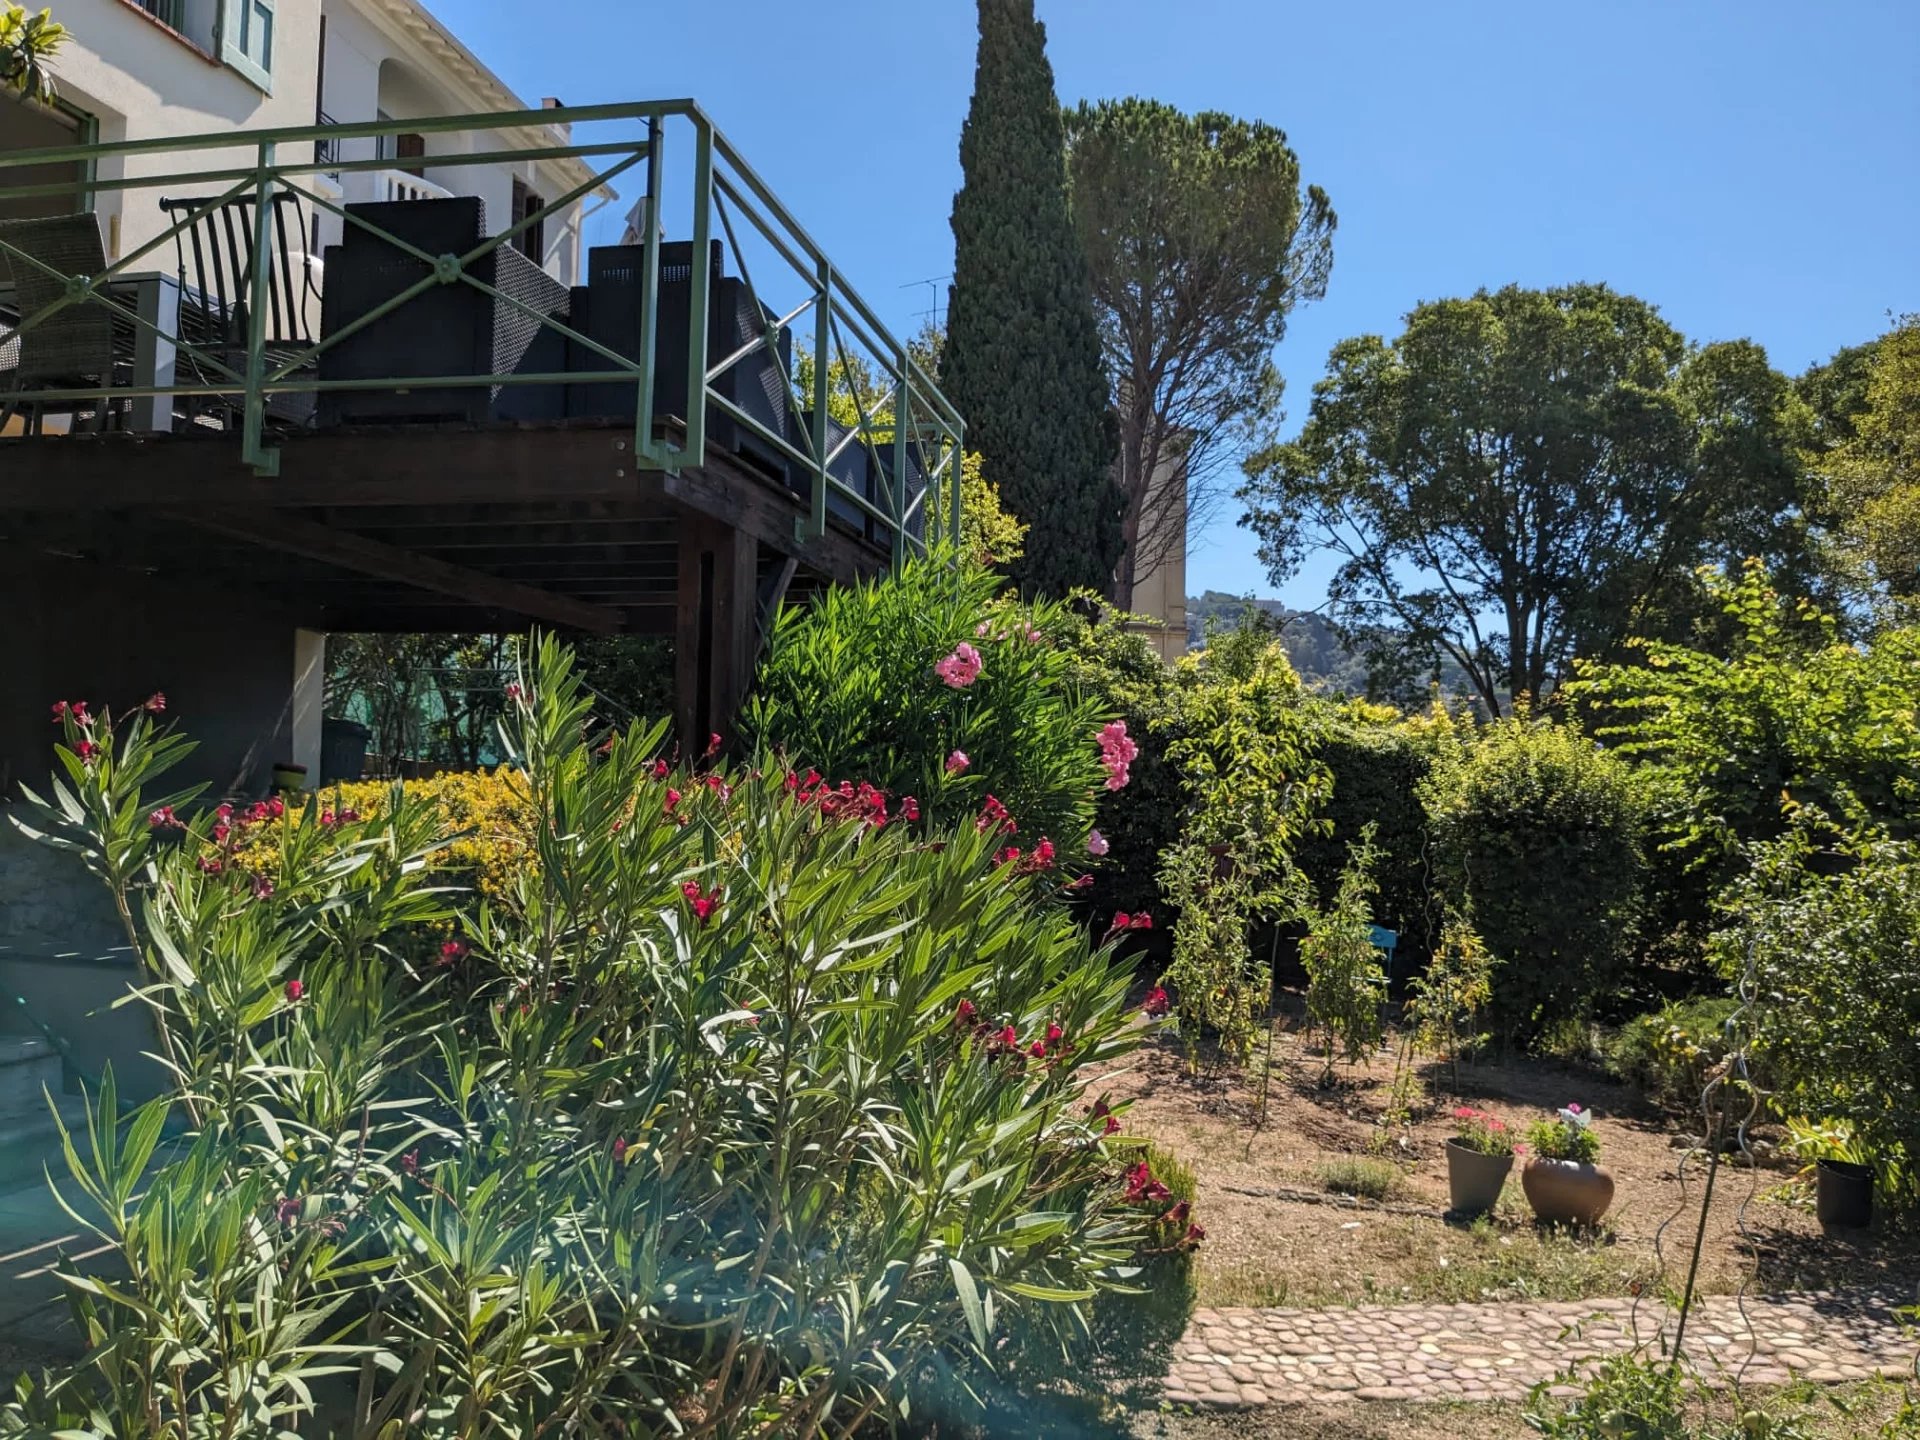 Cannes: Montfleury sector: Villa 213m2 location n°1, Quiet, garden, swimming pool, private parking!